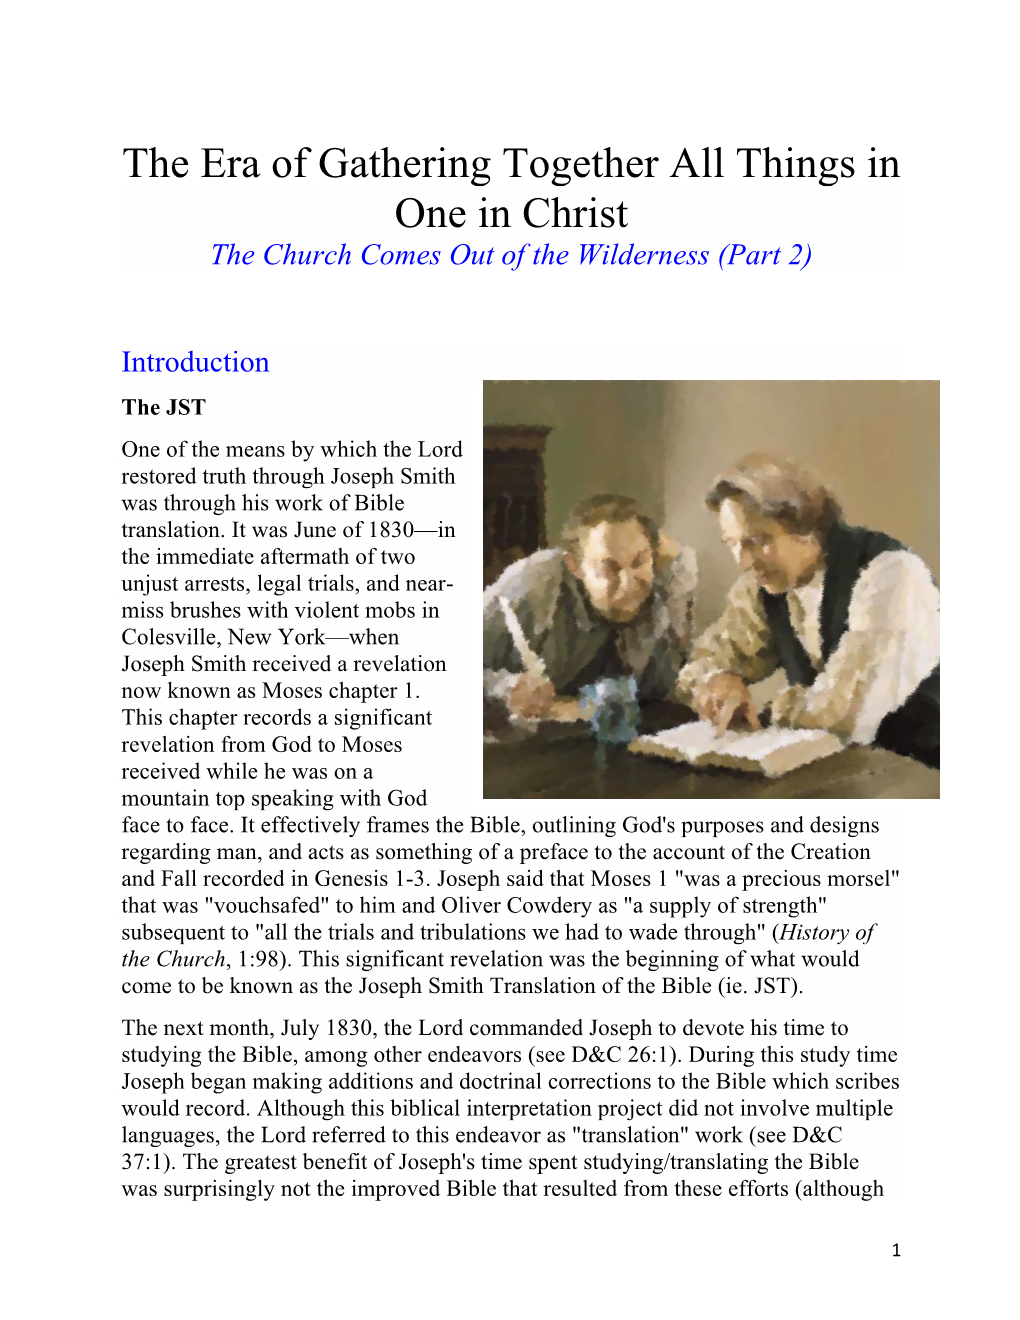 The Era of Gathering Together All Things in One in Christ the Church Comes out of the Wilderness (Part 2)